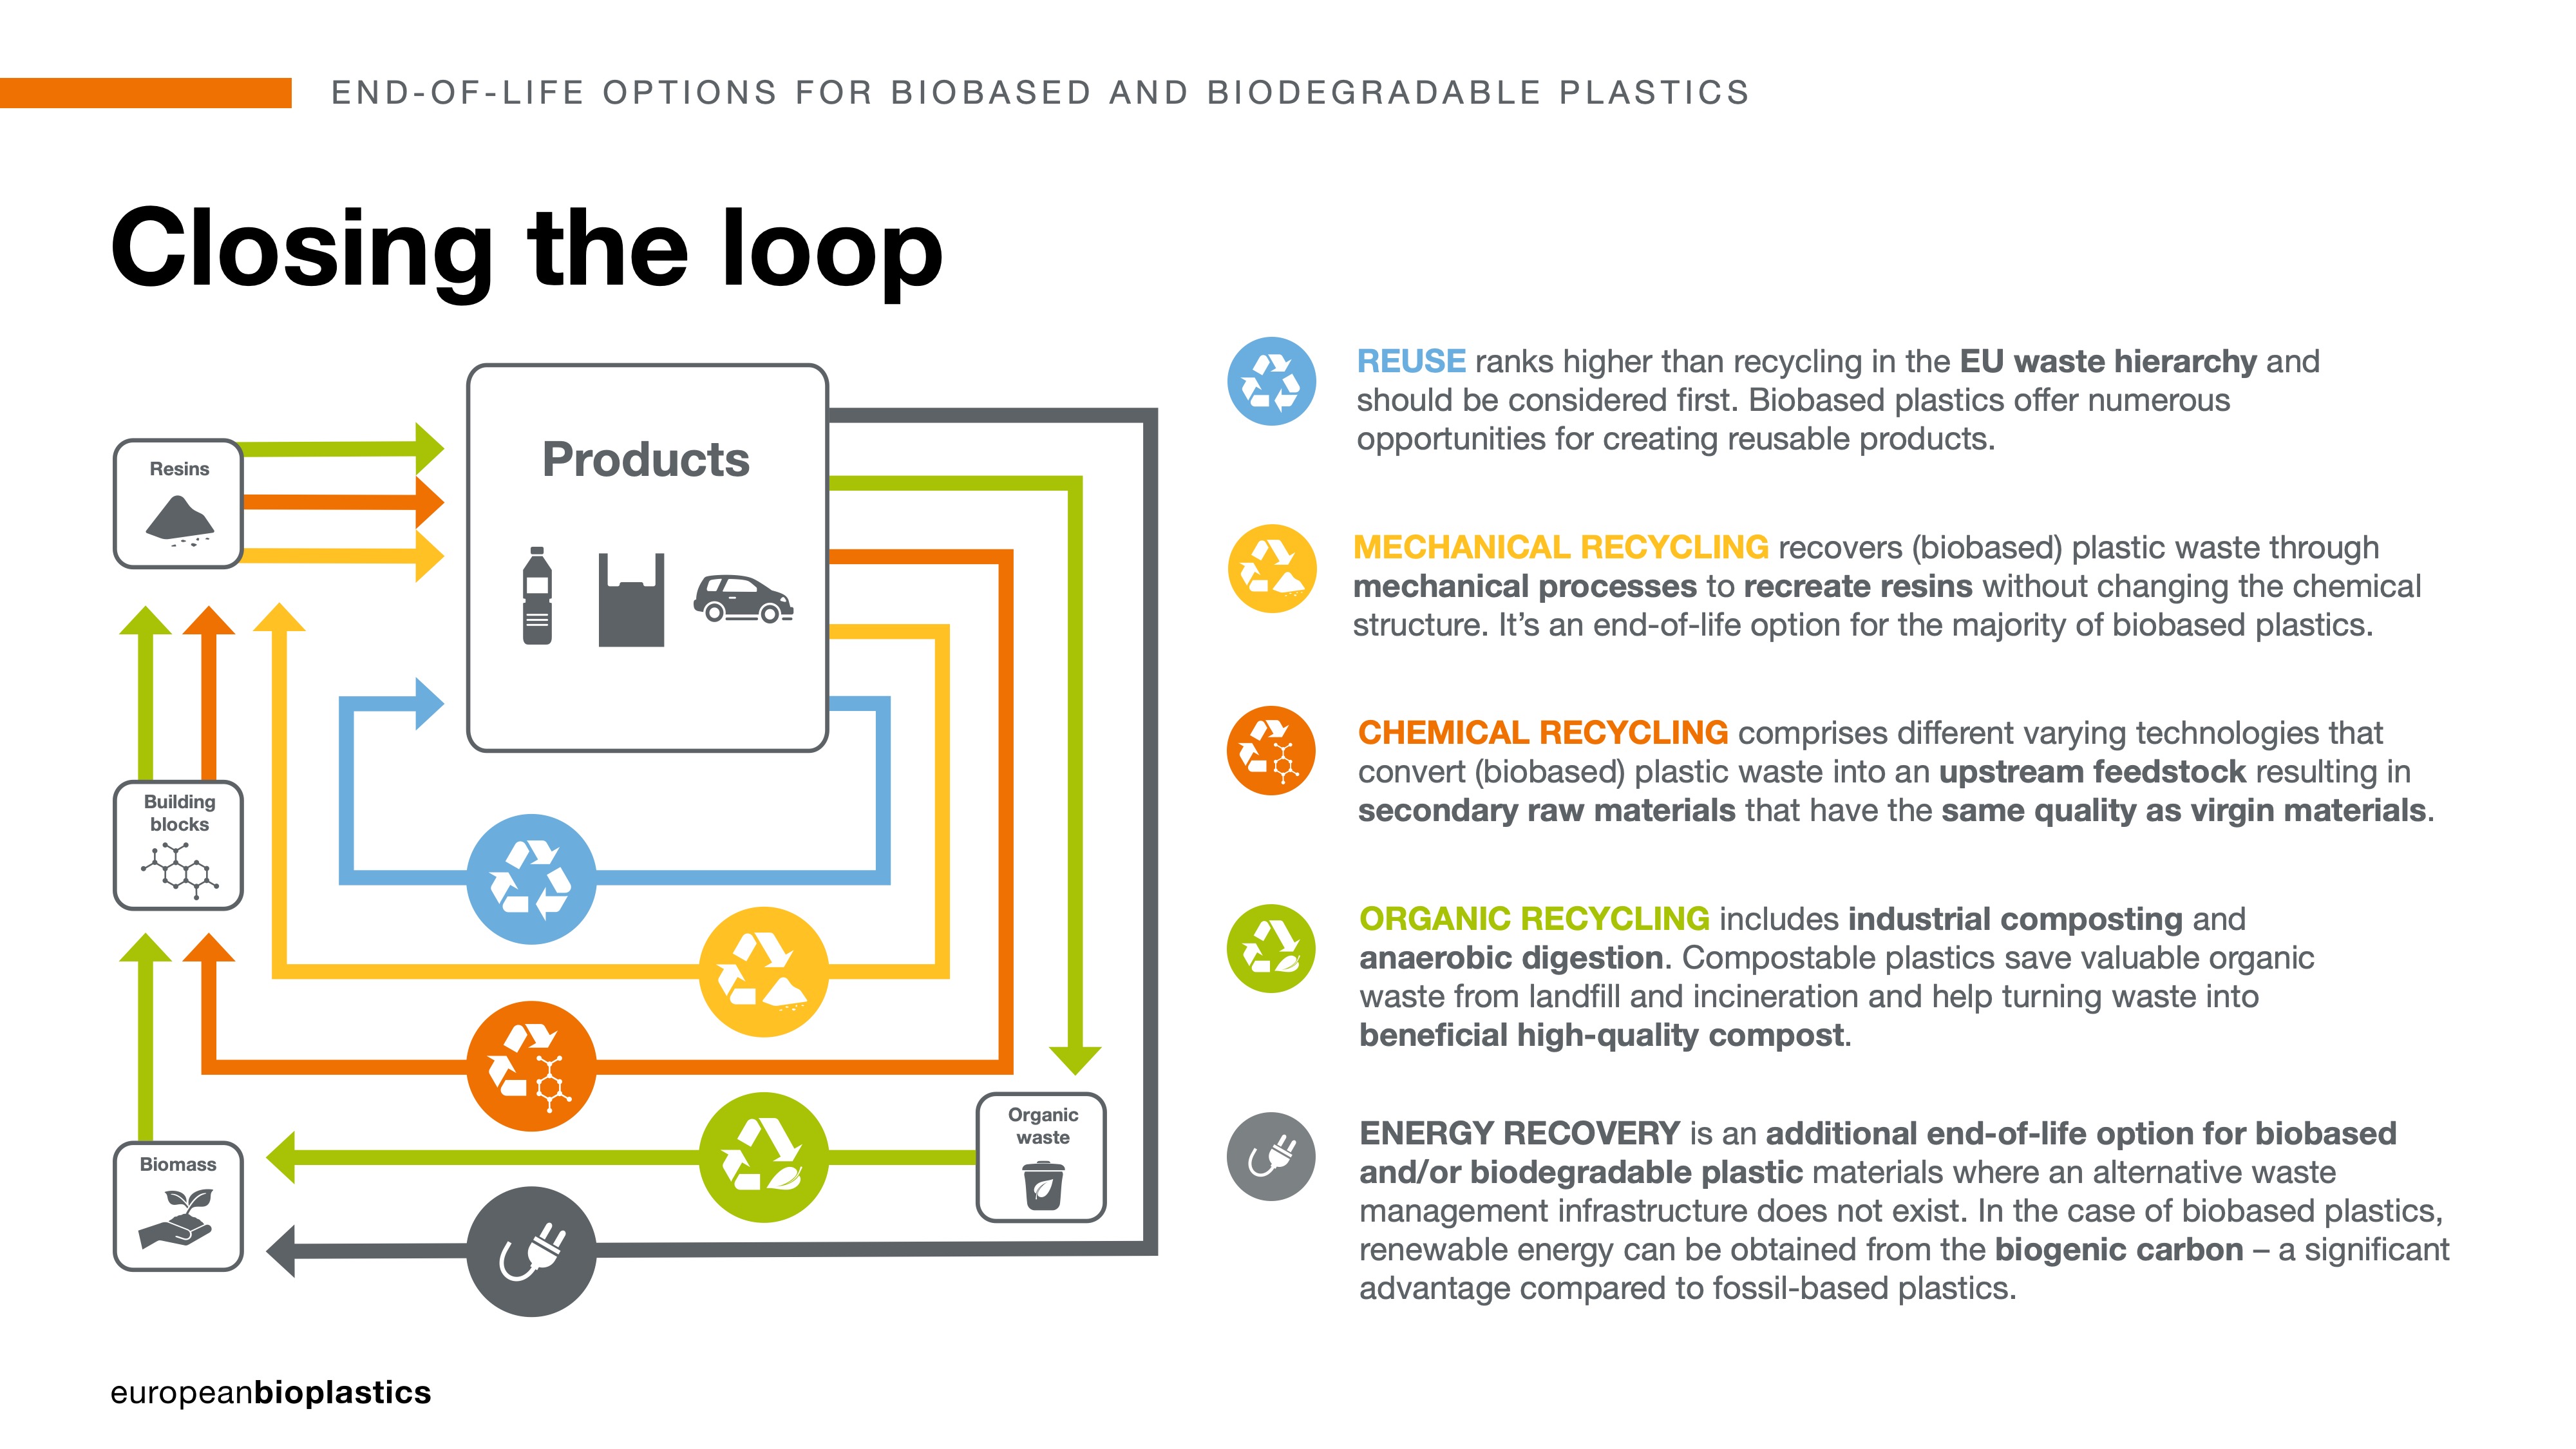 Closing the loop - end of life options for bio-based and biodegradable plastics